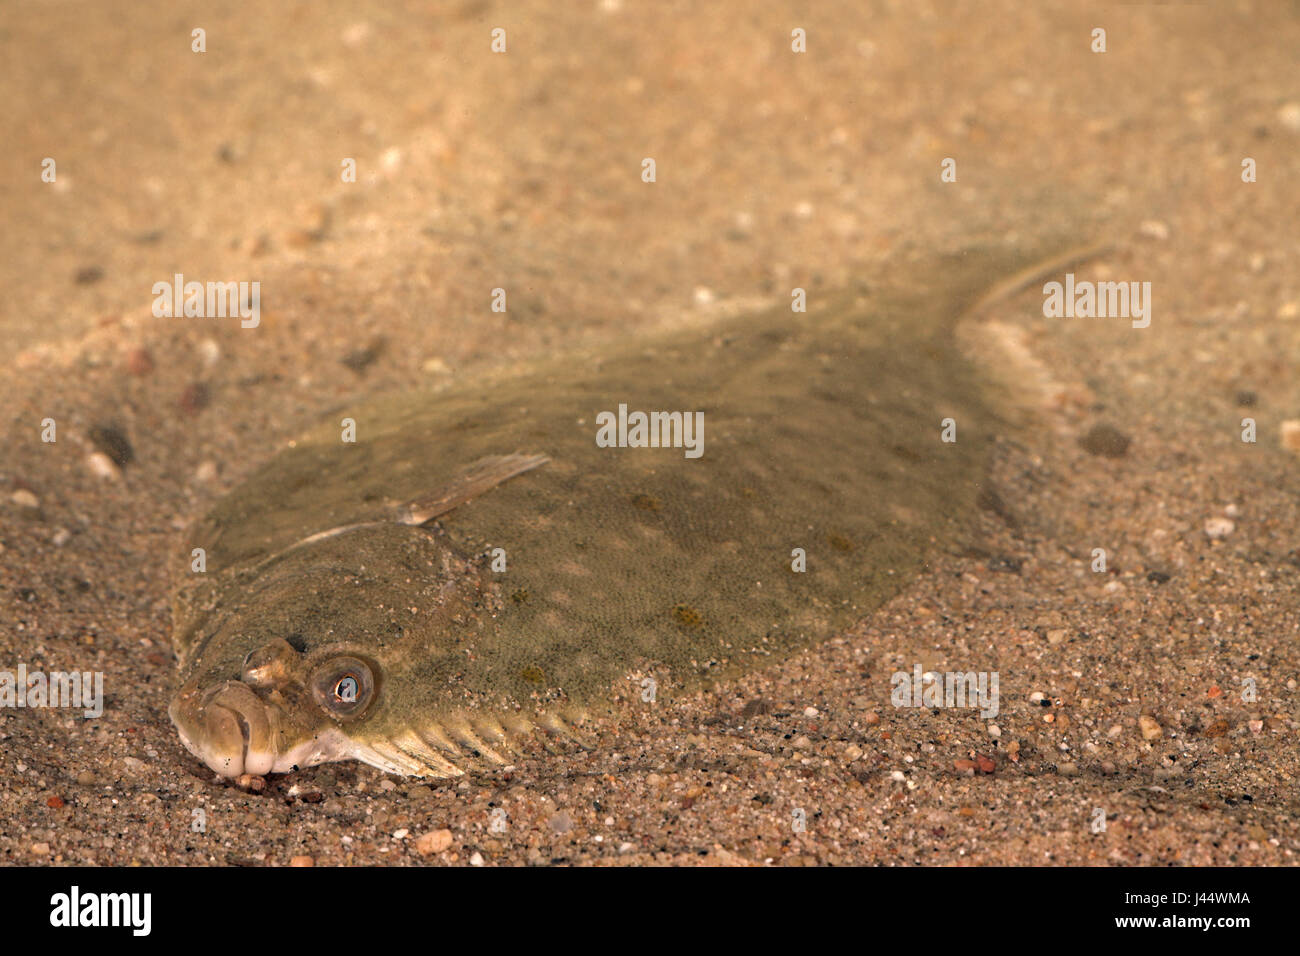 a camouflaged flounder on sand Stock Photo